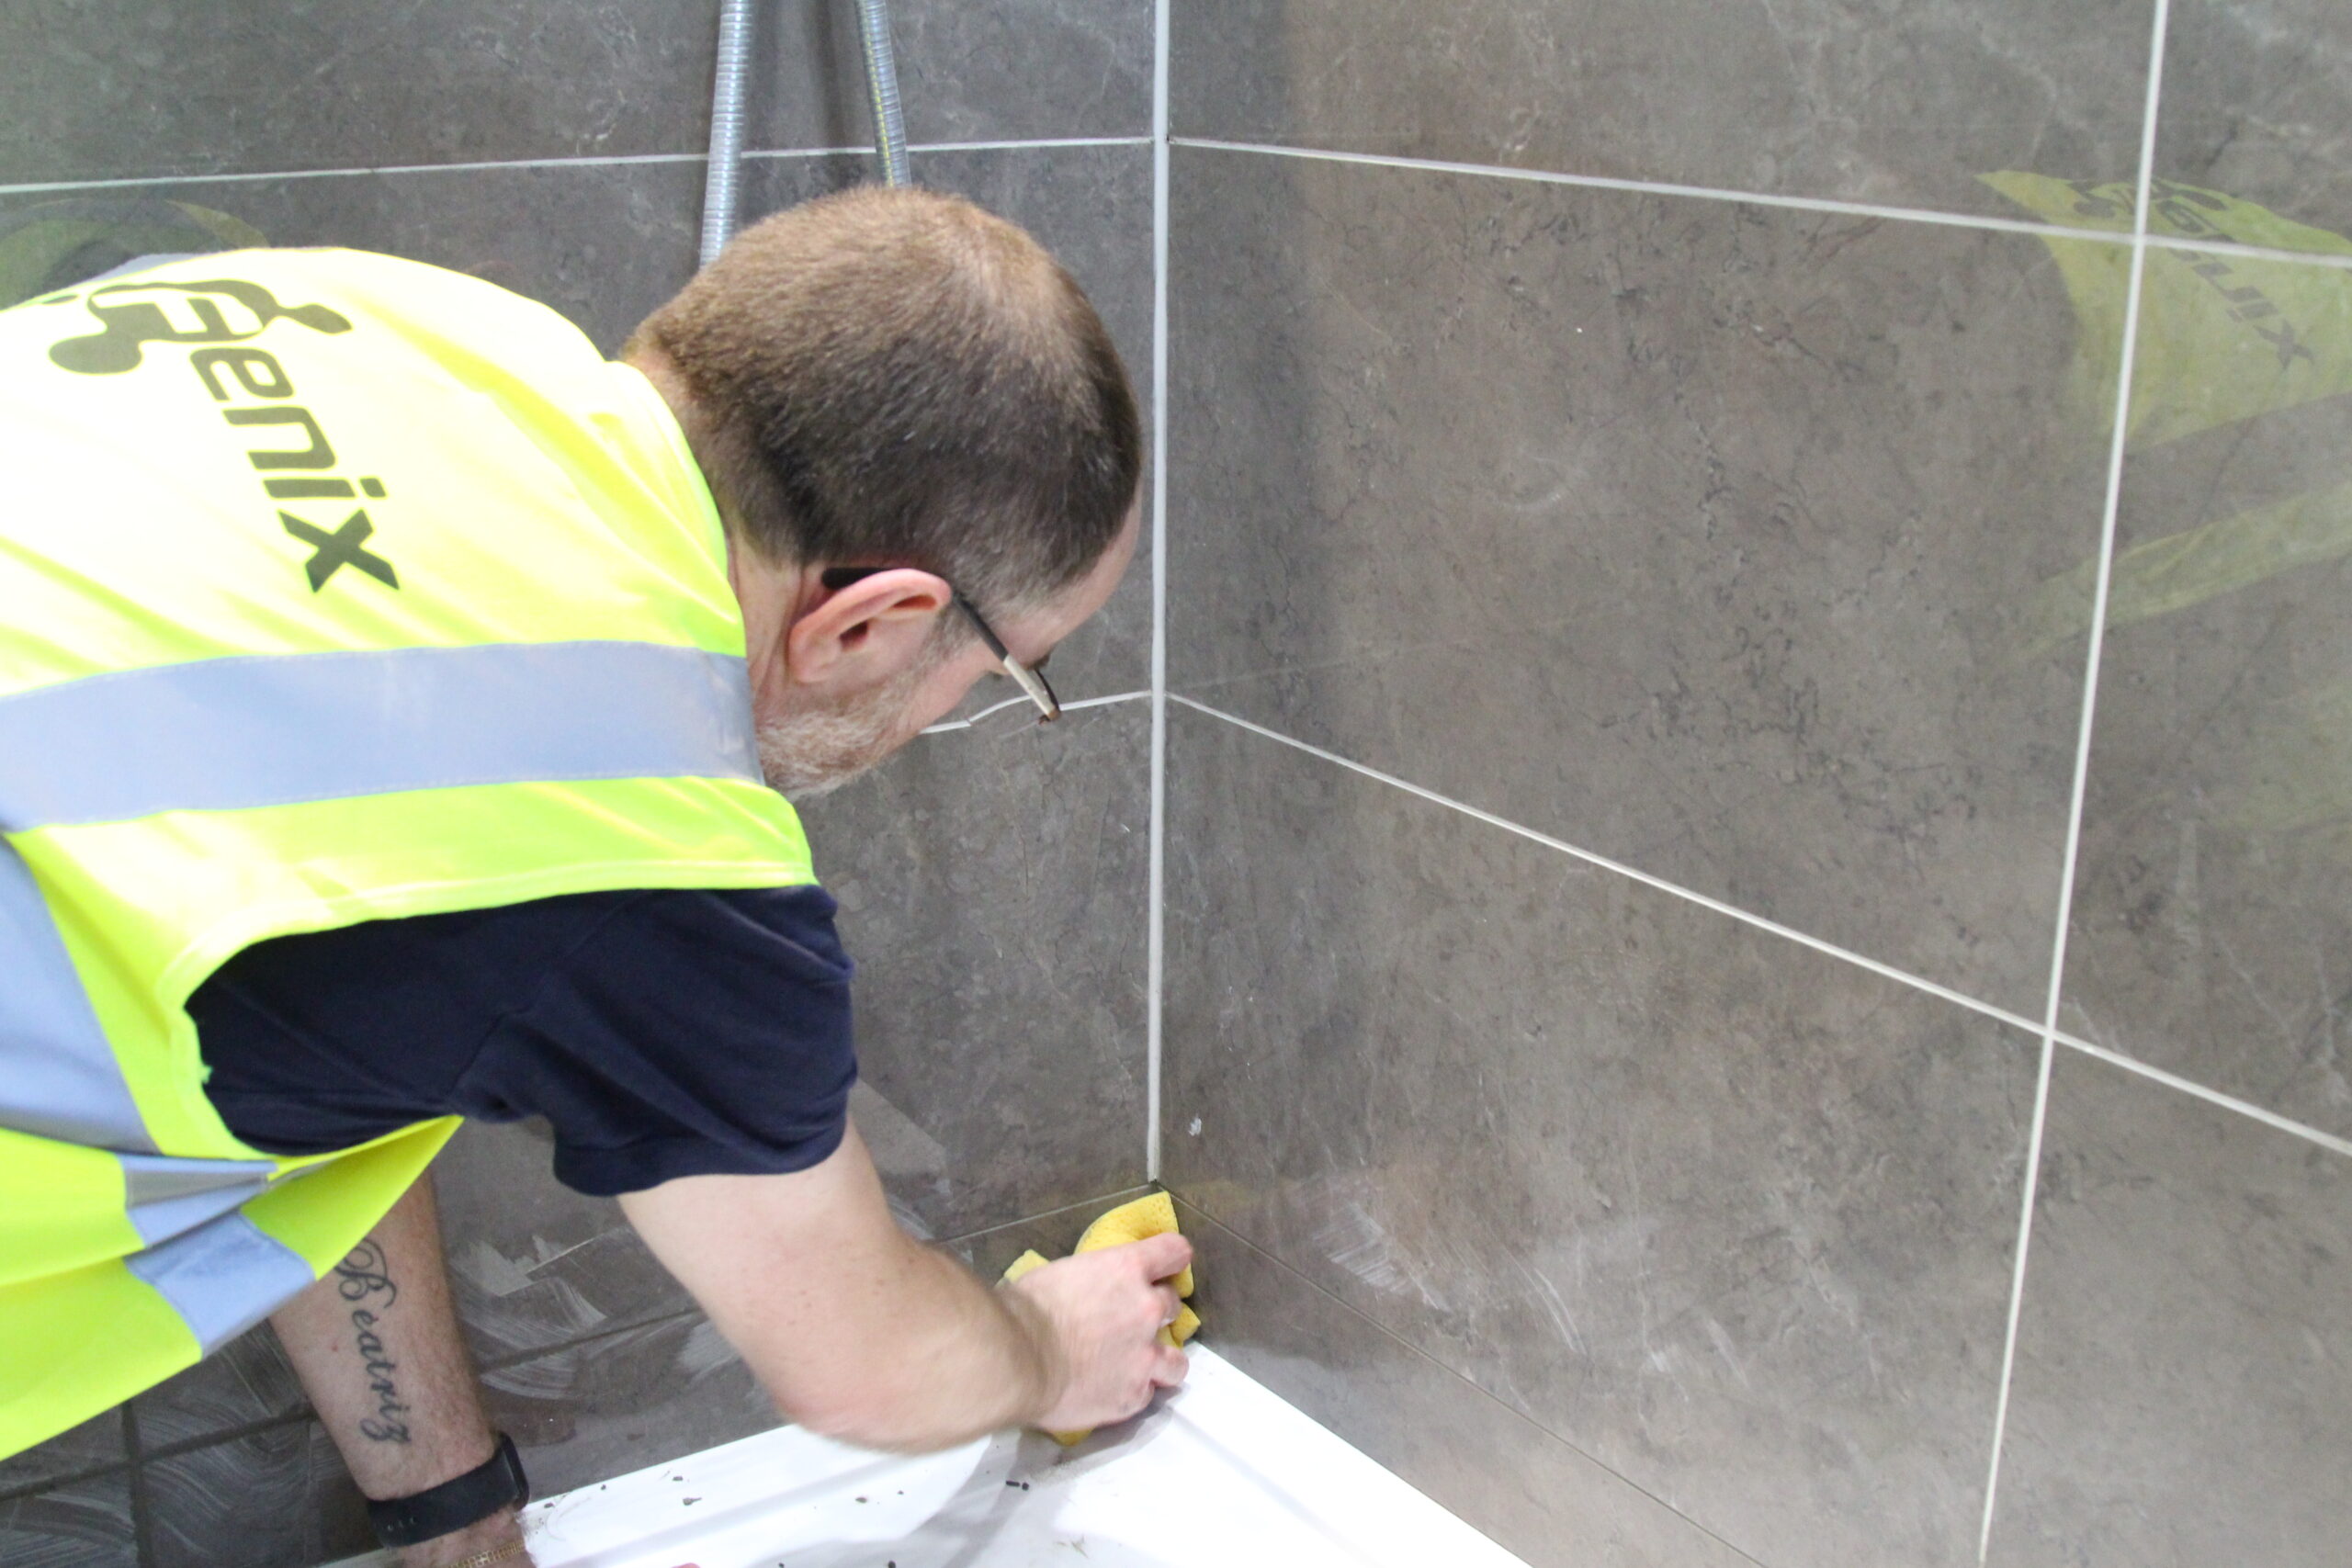 Tiling services on the bathroom